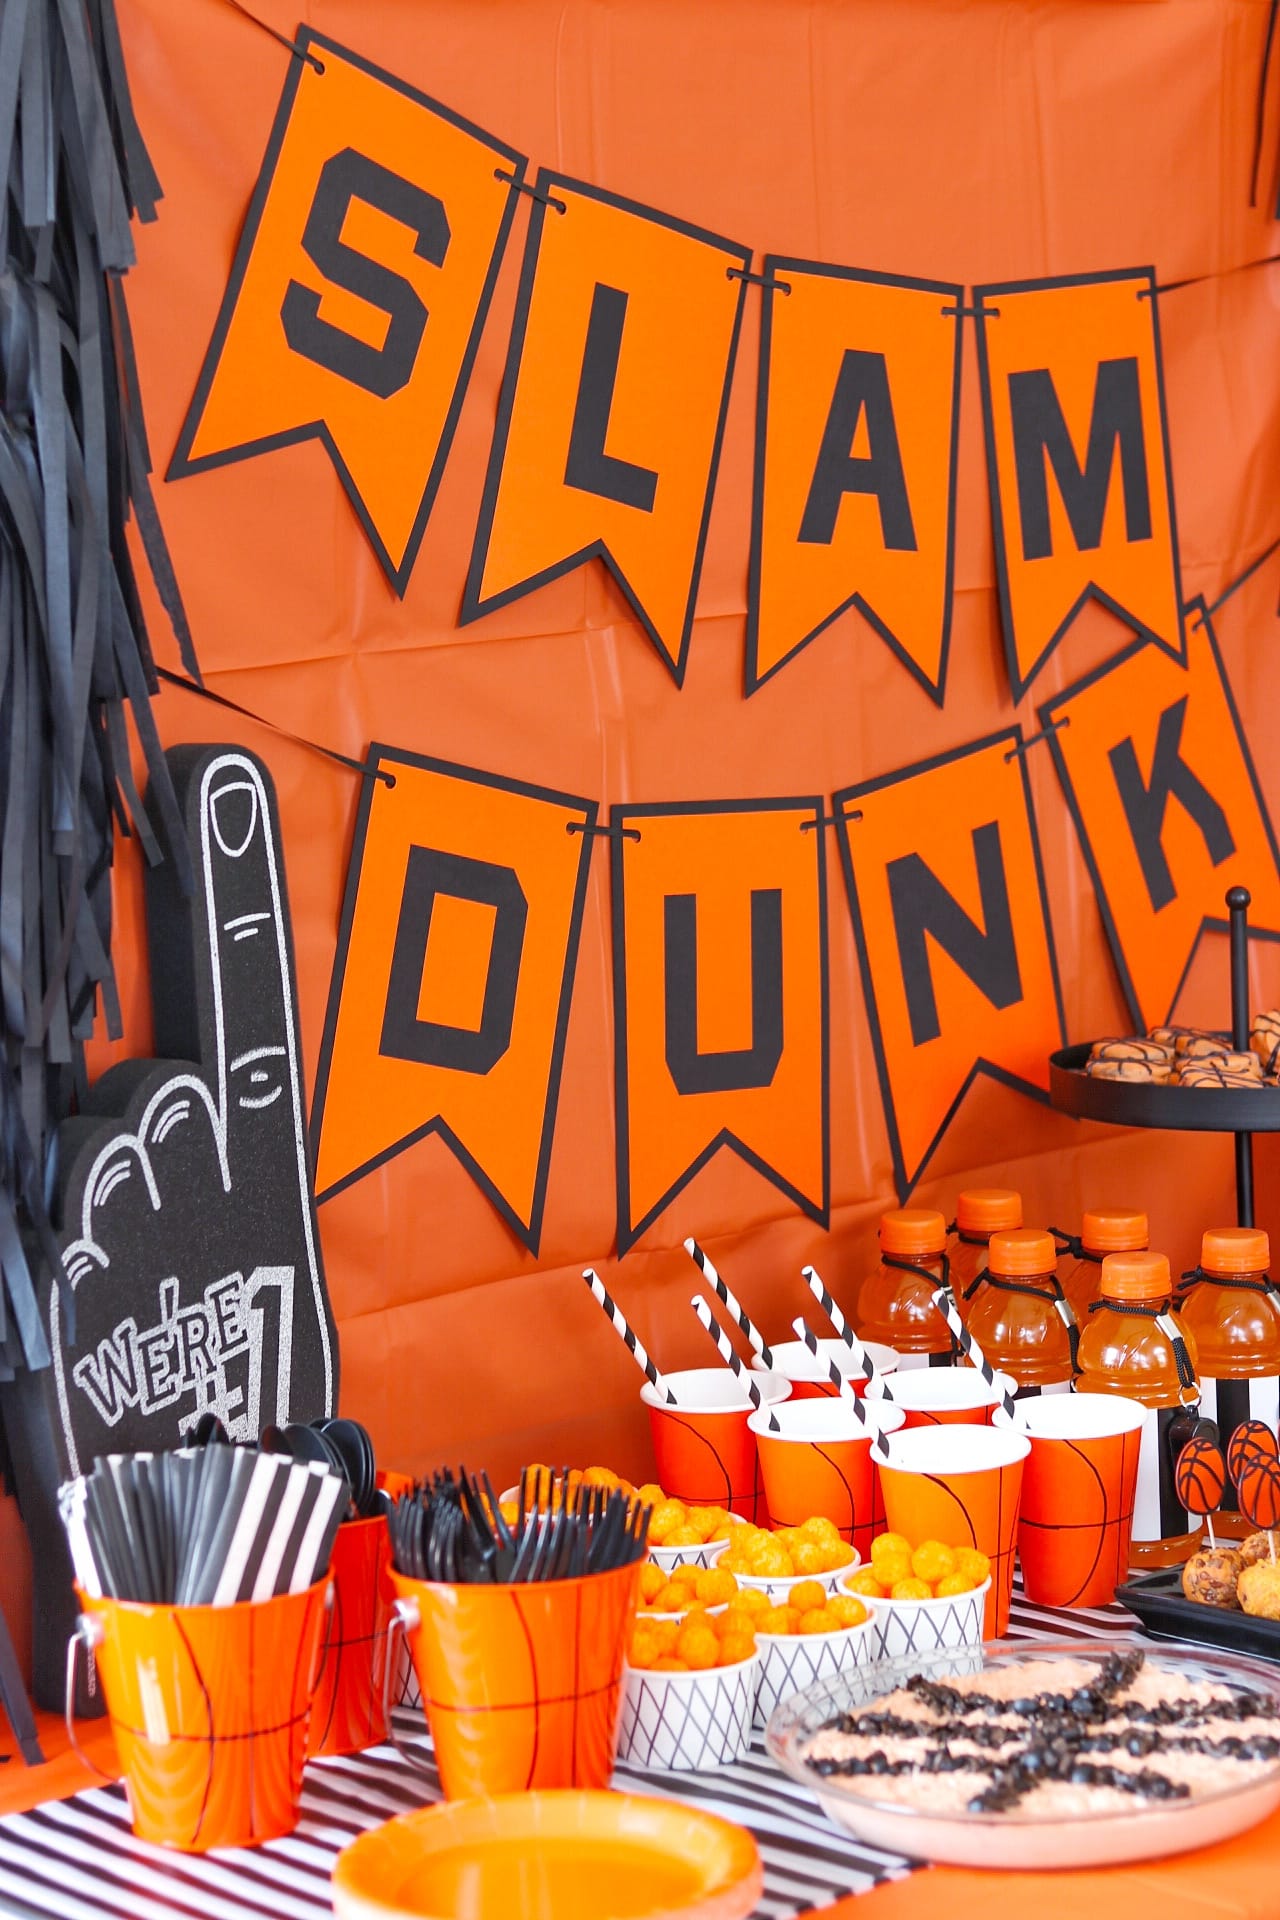 Basketball-Themed Party Ideas (great for a basketball watch party, birthday party, or team end-of-season celebration)